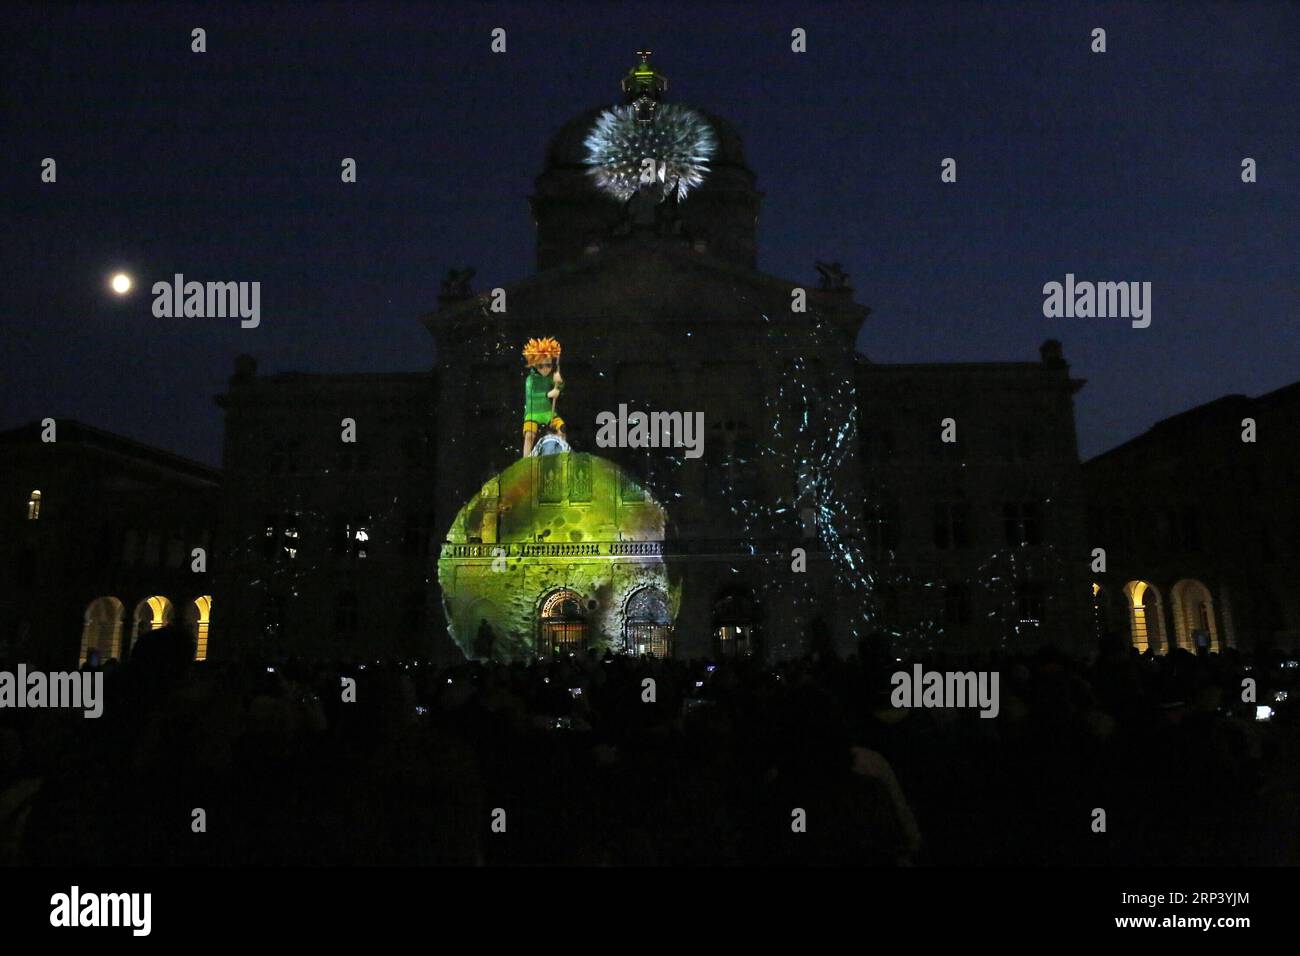 (181019) -- BERN, Oct. 19, 2018 -- Photo taken on Oct. 19, 2018 shows the light show Rendez-vous Bundesplatz in front of the Swiss Parliament Building in Bern, Switzerland. The annual light show, which will last till Nov. 24, shows the world-famous novella The Little Prince by Antoine de Saint-Exupery this year. ) SWITZERLAND-BERN-LIGHT SHOW RubenxSprich PUBLICATIONxNOTxINxCHN Stock Photo